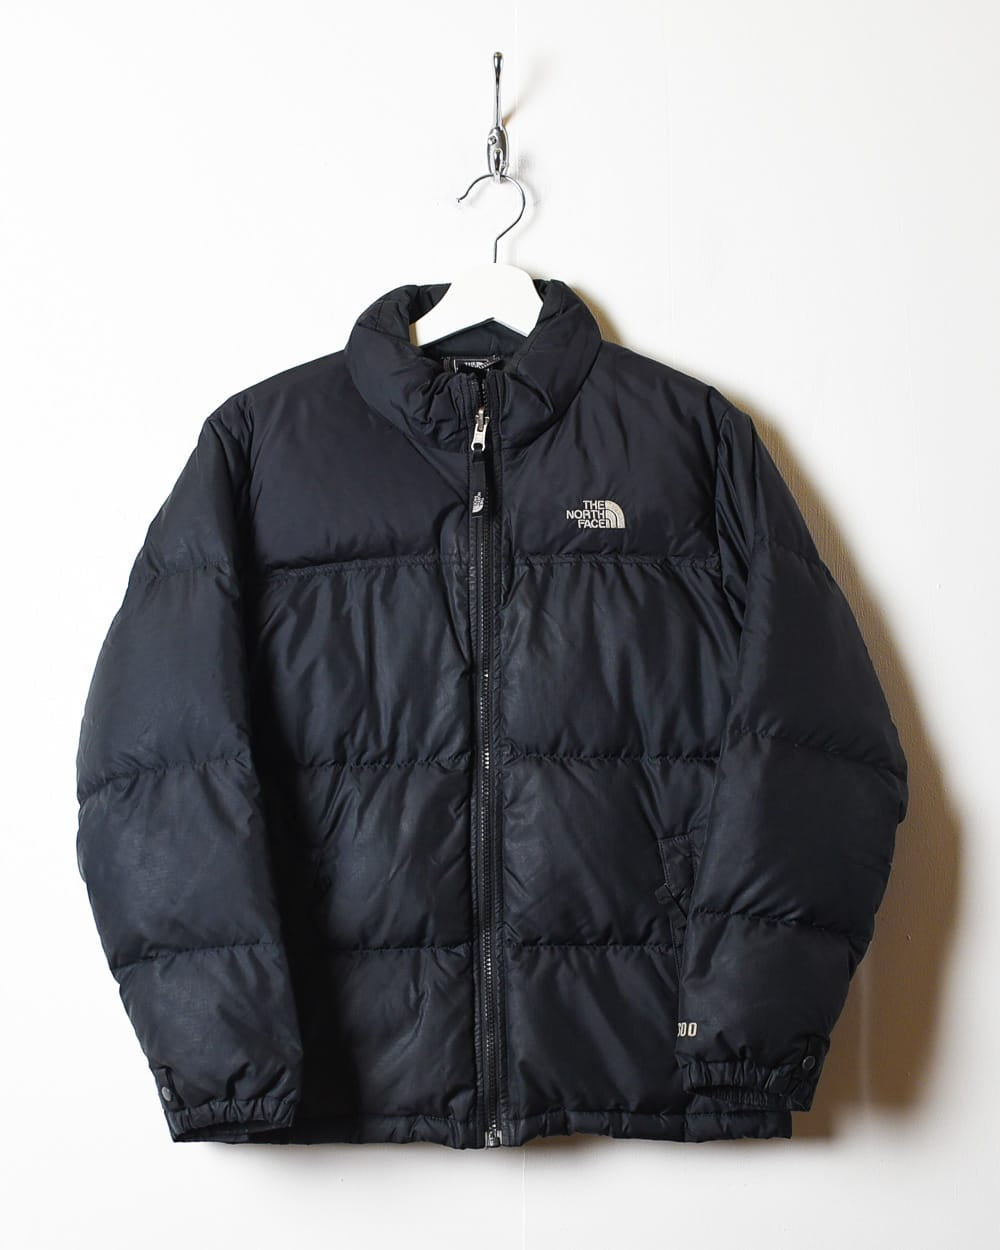 Black The North Face Nuptse 600 Puffer Jacket - X-Small Women's